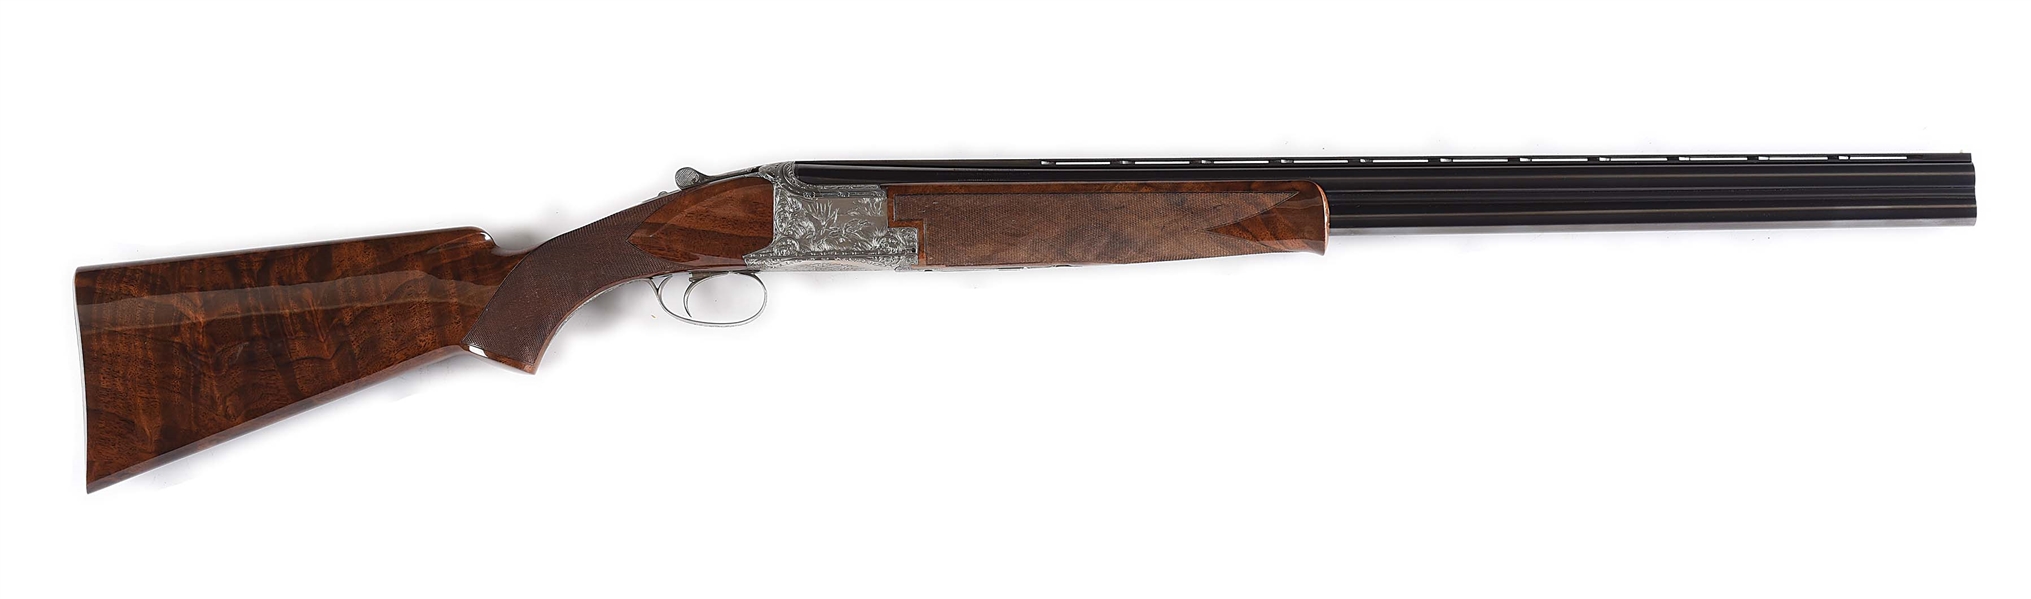 (M) BROWNING "EXHIBITION" SUPERPOSED OVER UNDER SHOTGUN ENGRAVED BY LEWANCZVK WITH CASE